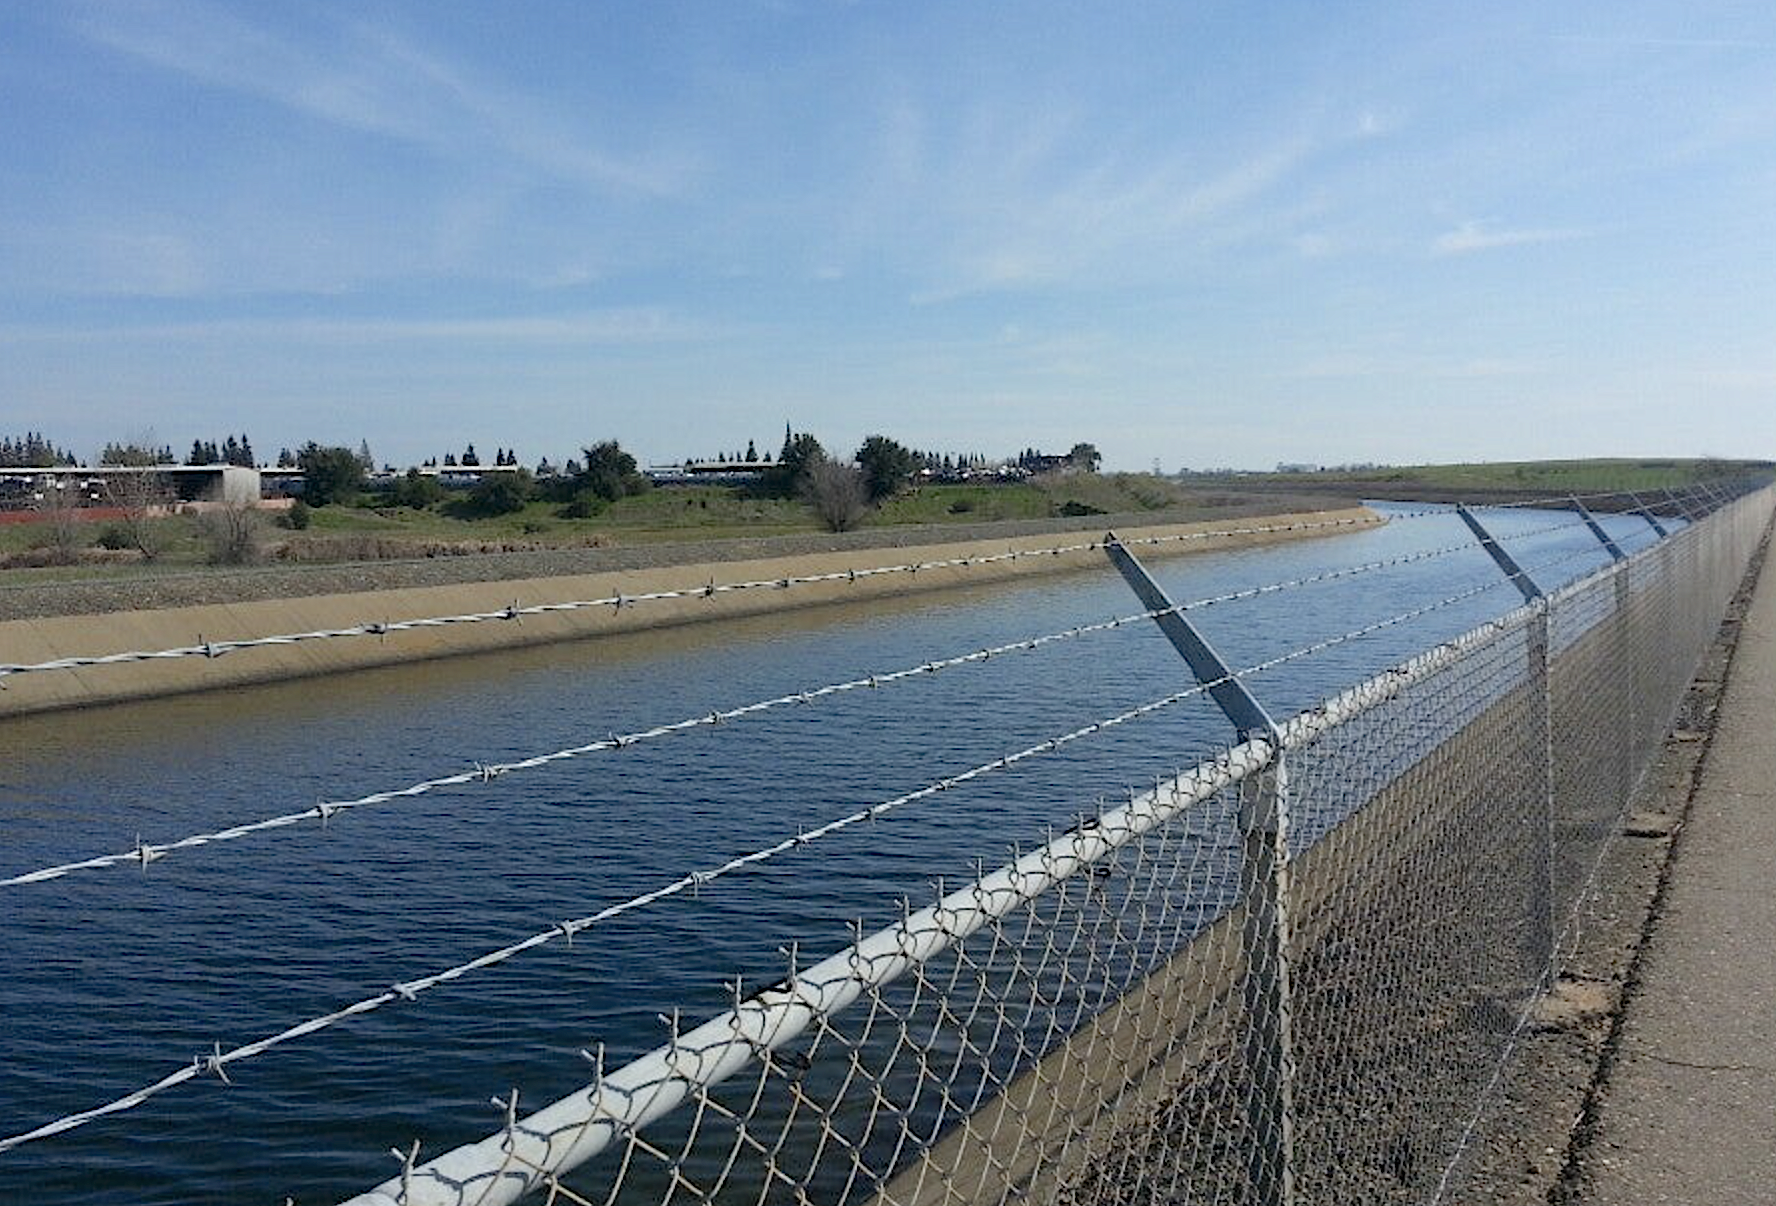 South Folsom Canal body investigation turned over to coroner